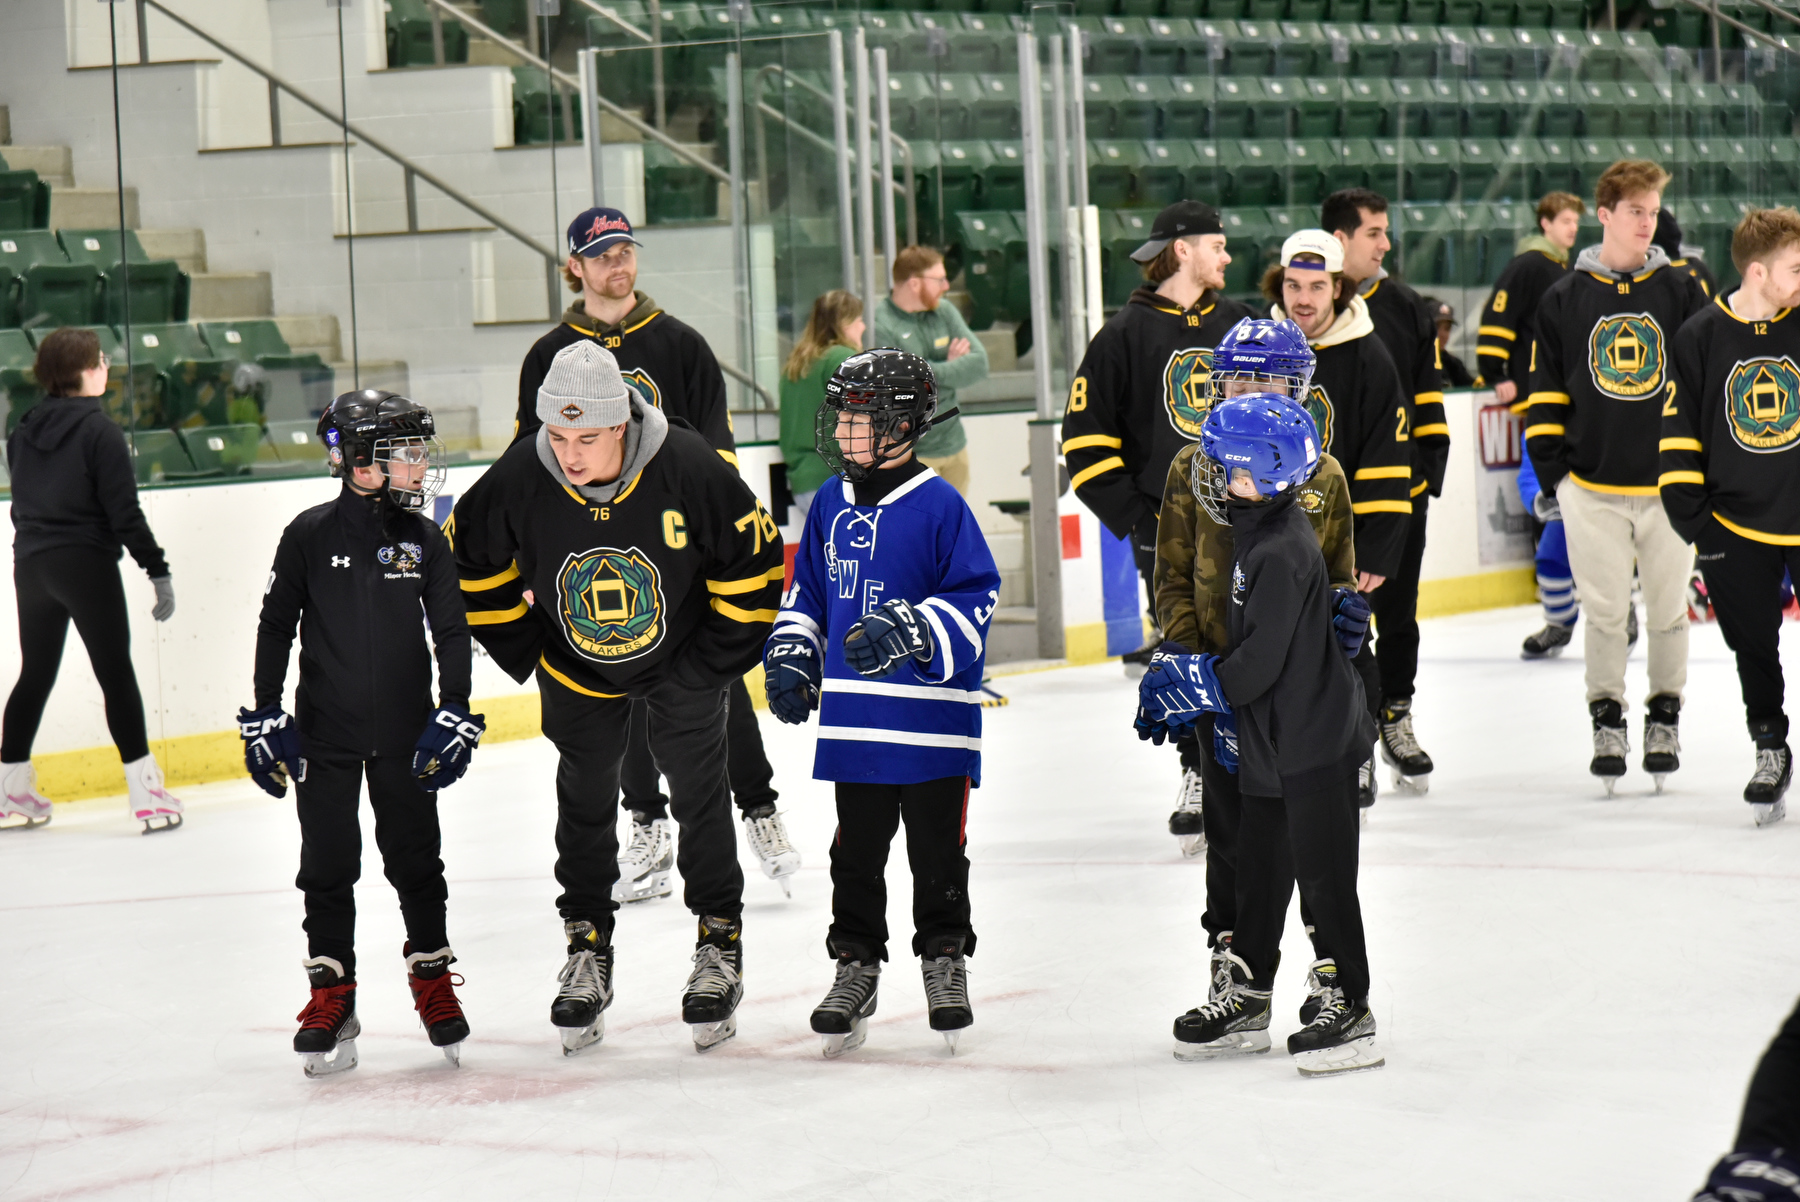 Laker men's ice hockey team member Ryan Bunka (#76) talks with some young hockey players Dec. 4 during the Holiday Skate with the Lakers in the Marano Campus Center's Deborah F. Stanley Arena and Convocation Hall.